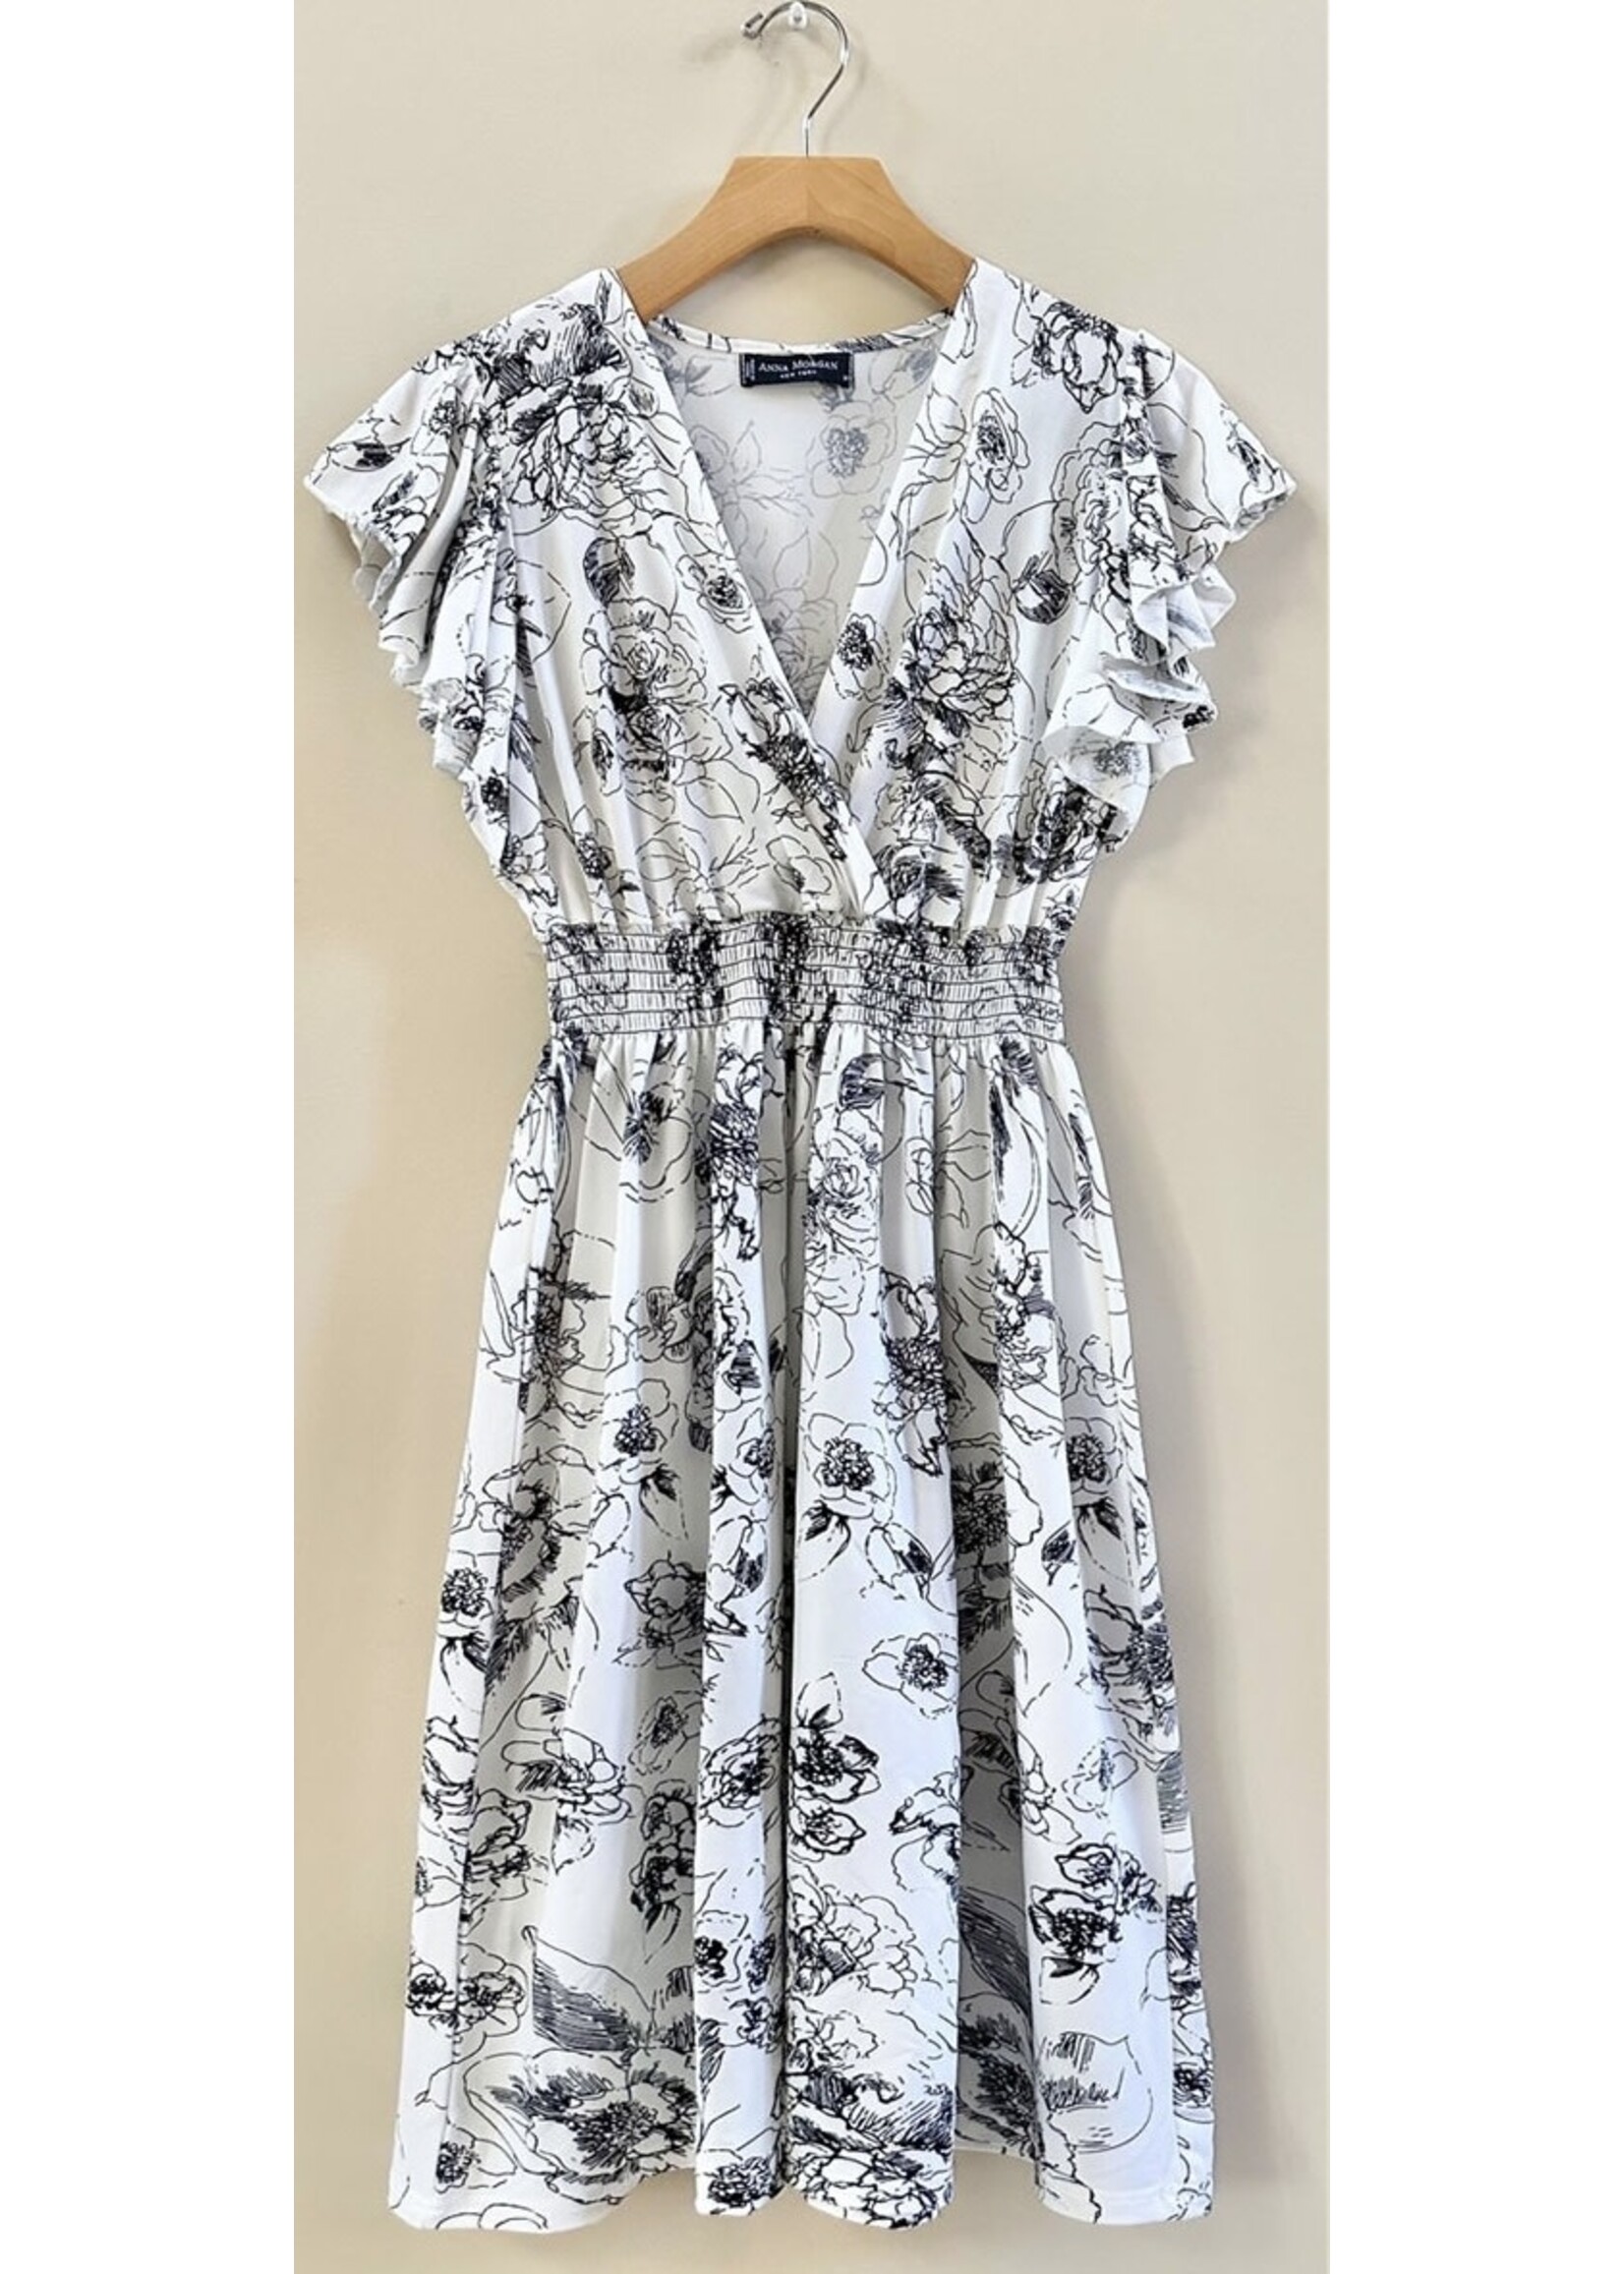 Anna Morgan COSMO LADIES WHITE W/NAVY FLORAL DESIGN DRESS Med